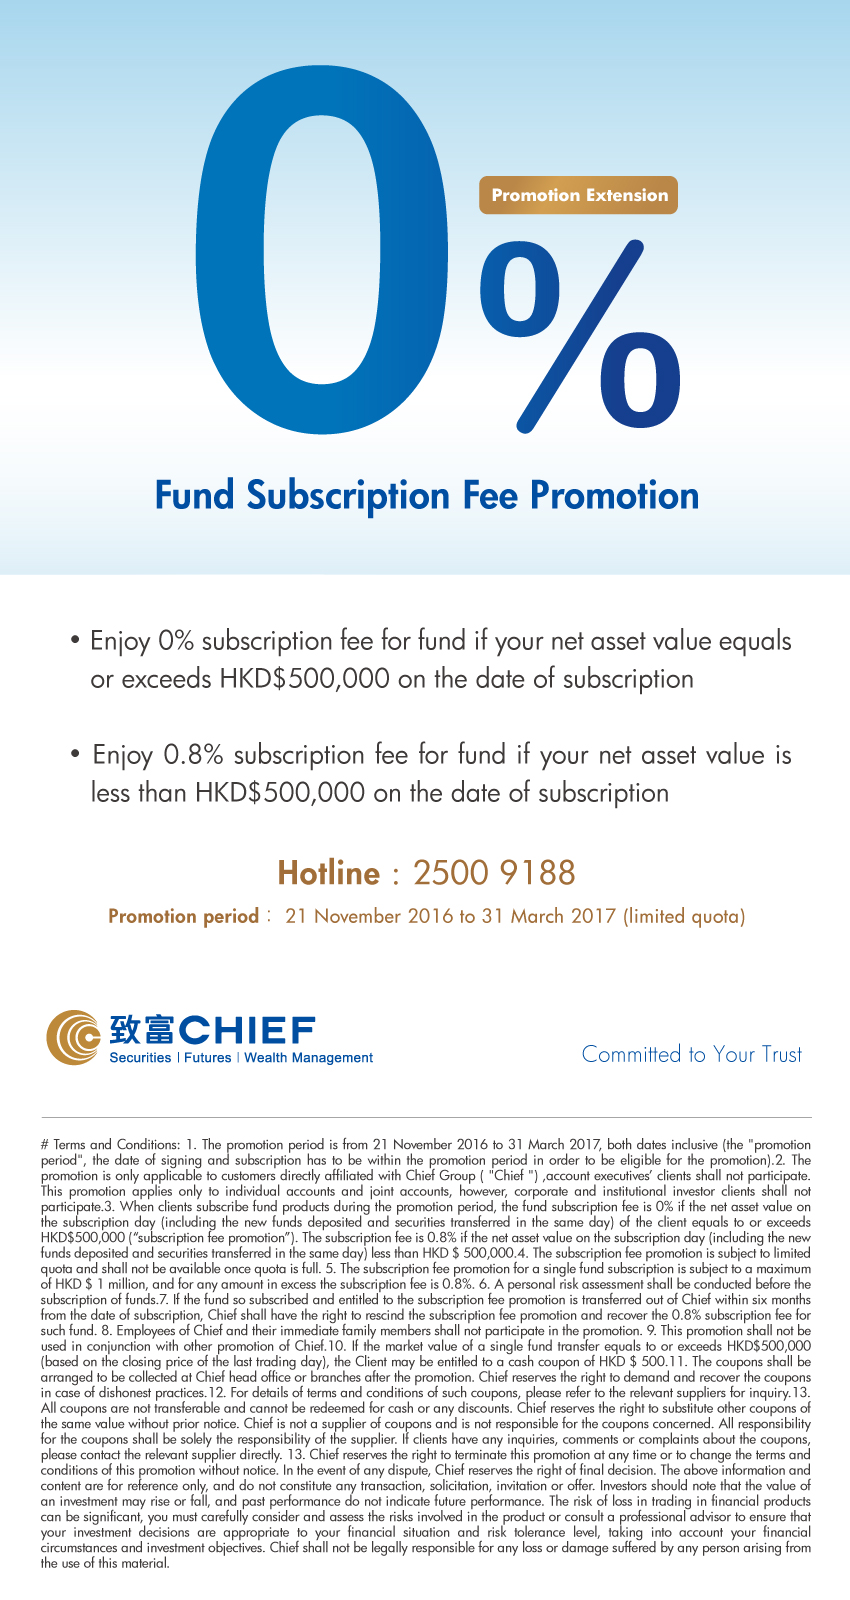 0% Fund Subscription Fee Promotion